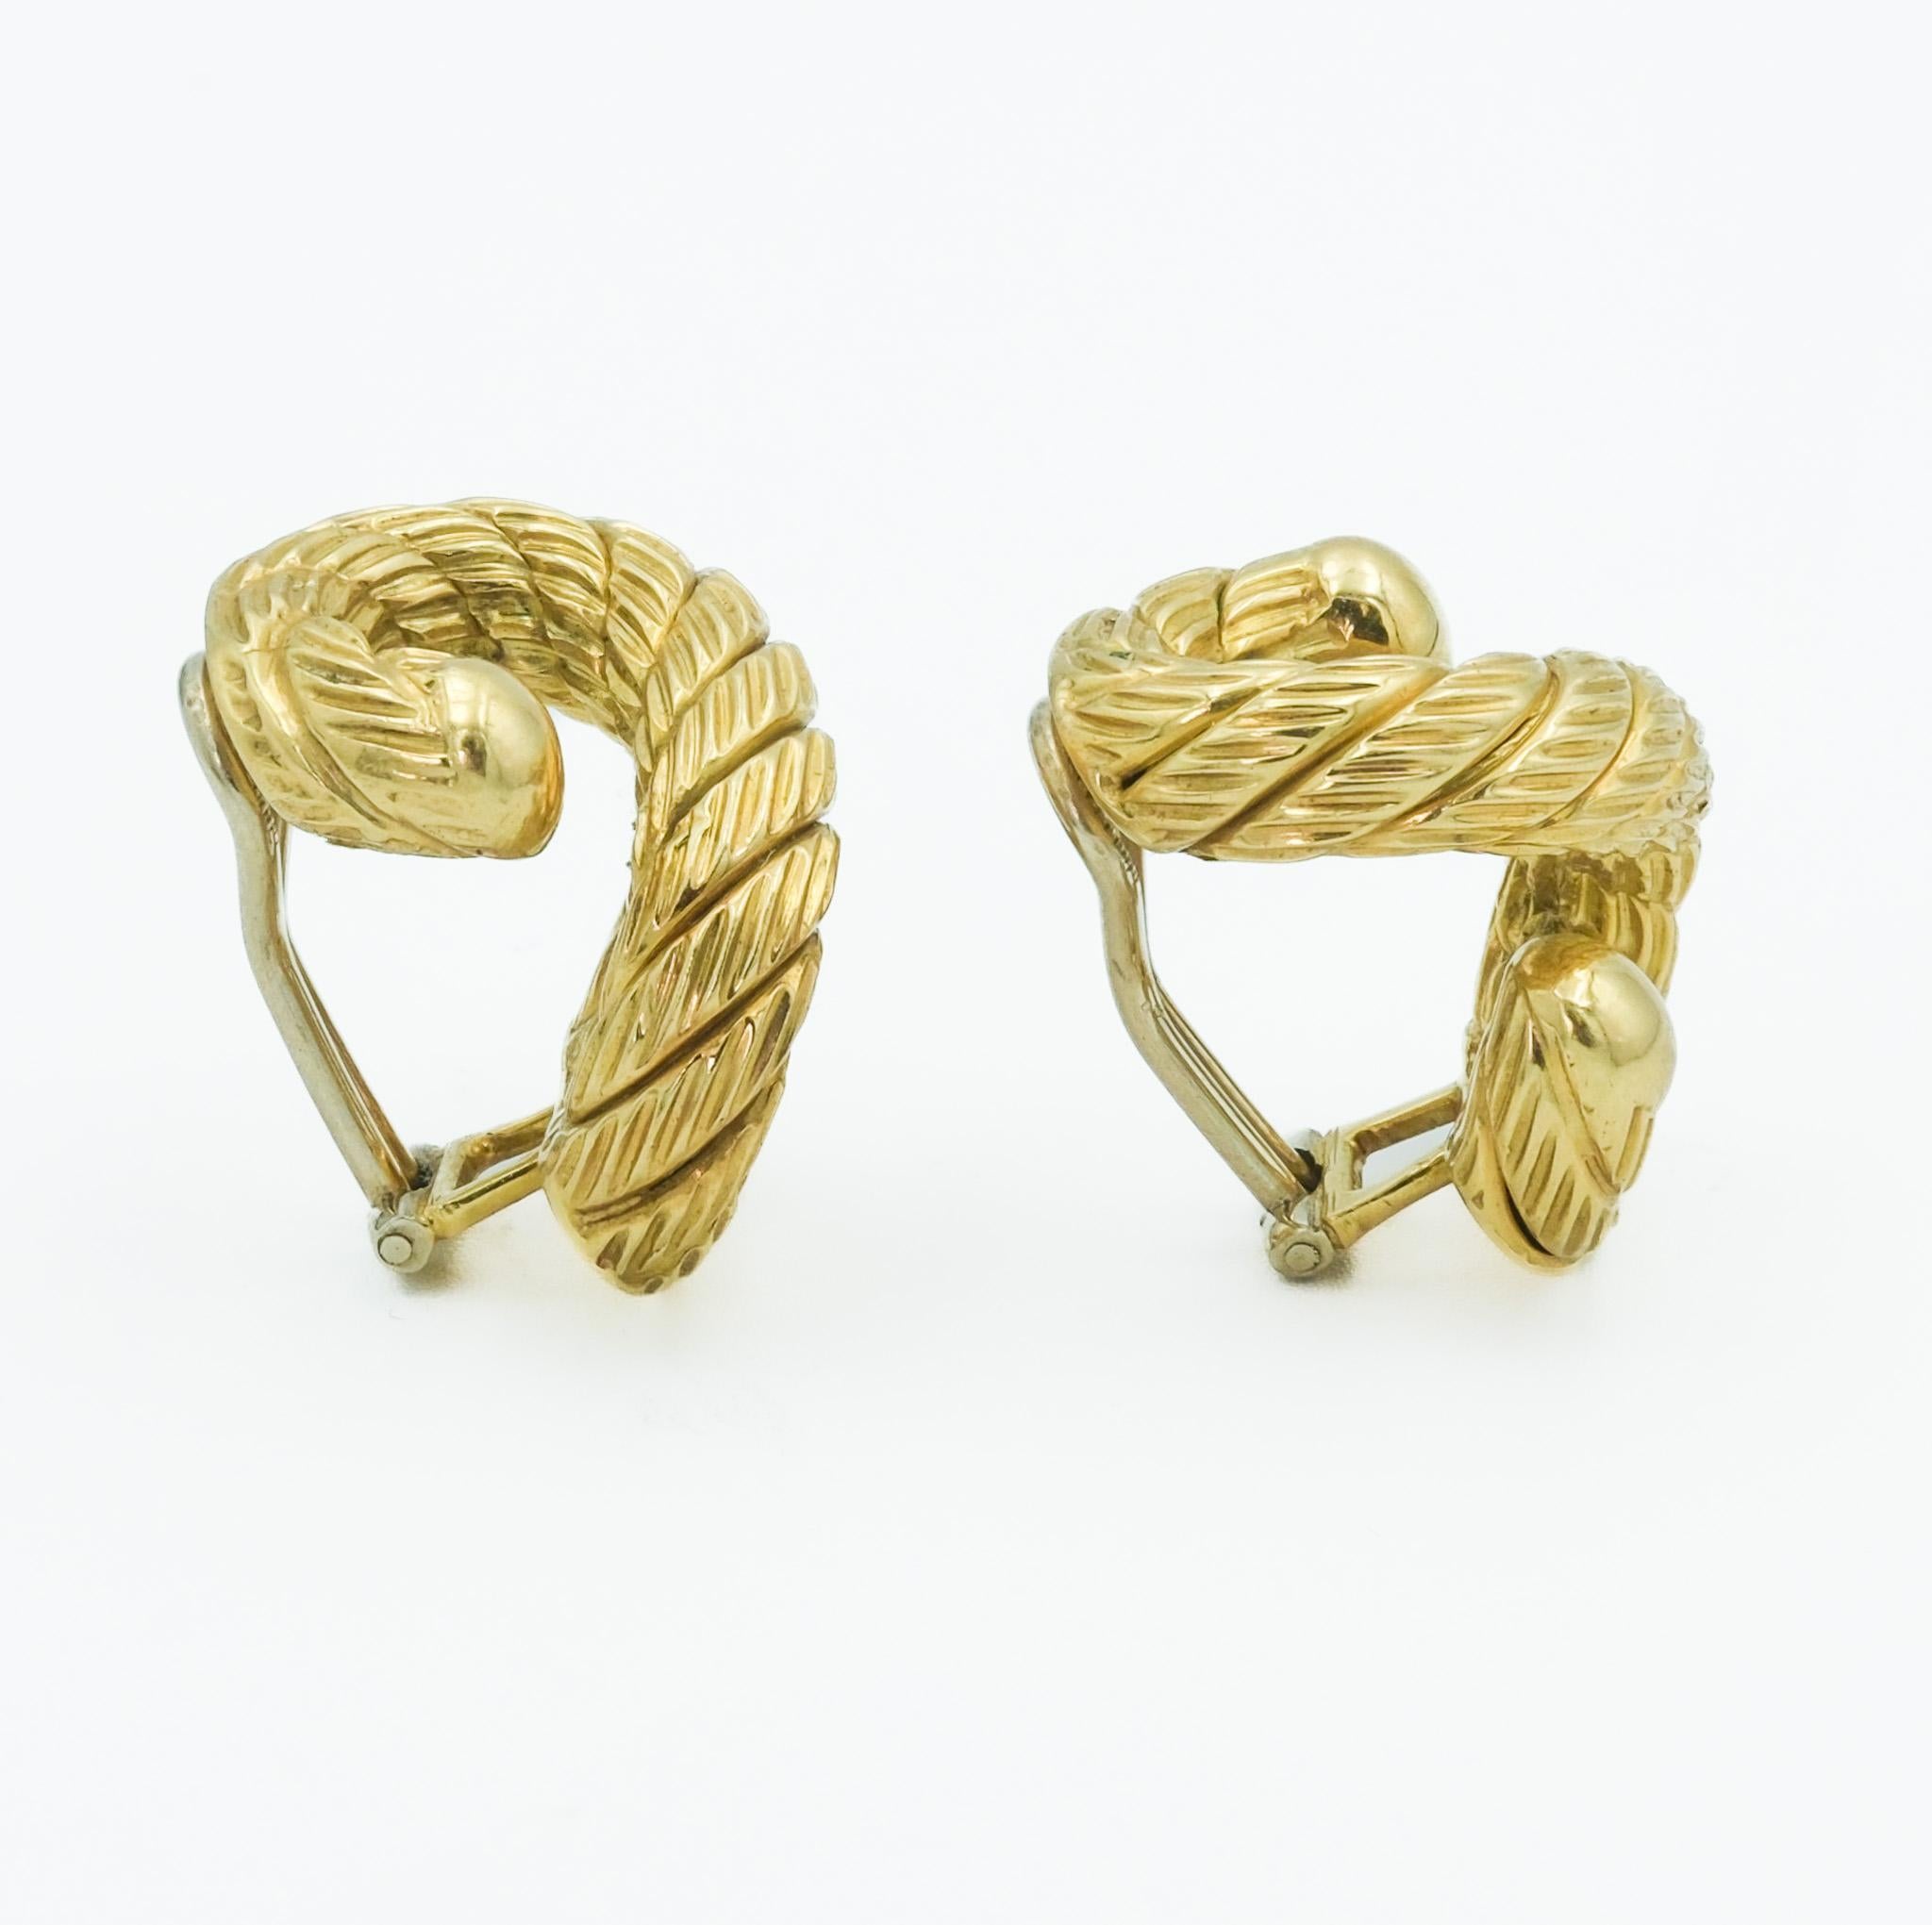 These 18-karat yellow gold clip-on, huggie earrings by Carlo Weingrill exhibit a classic Italian elegance with a touch of modernity. The slightly hammered texture gives a cool and artisanal aesthetic to the rope design, a testimony to the mastery of